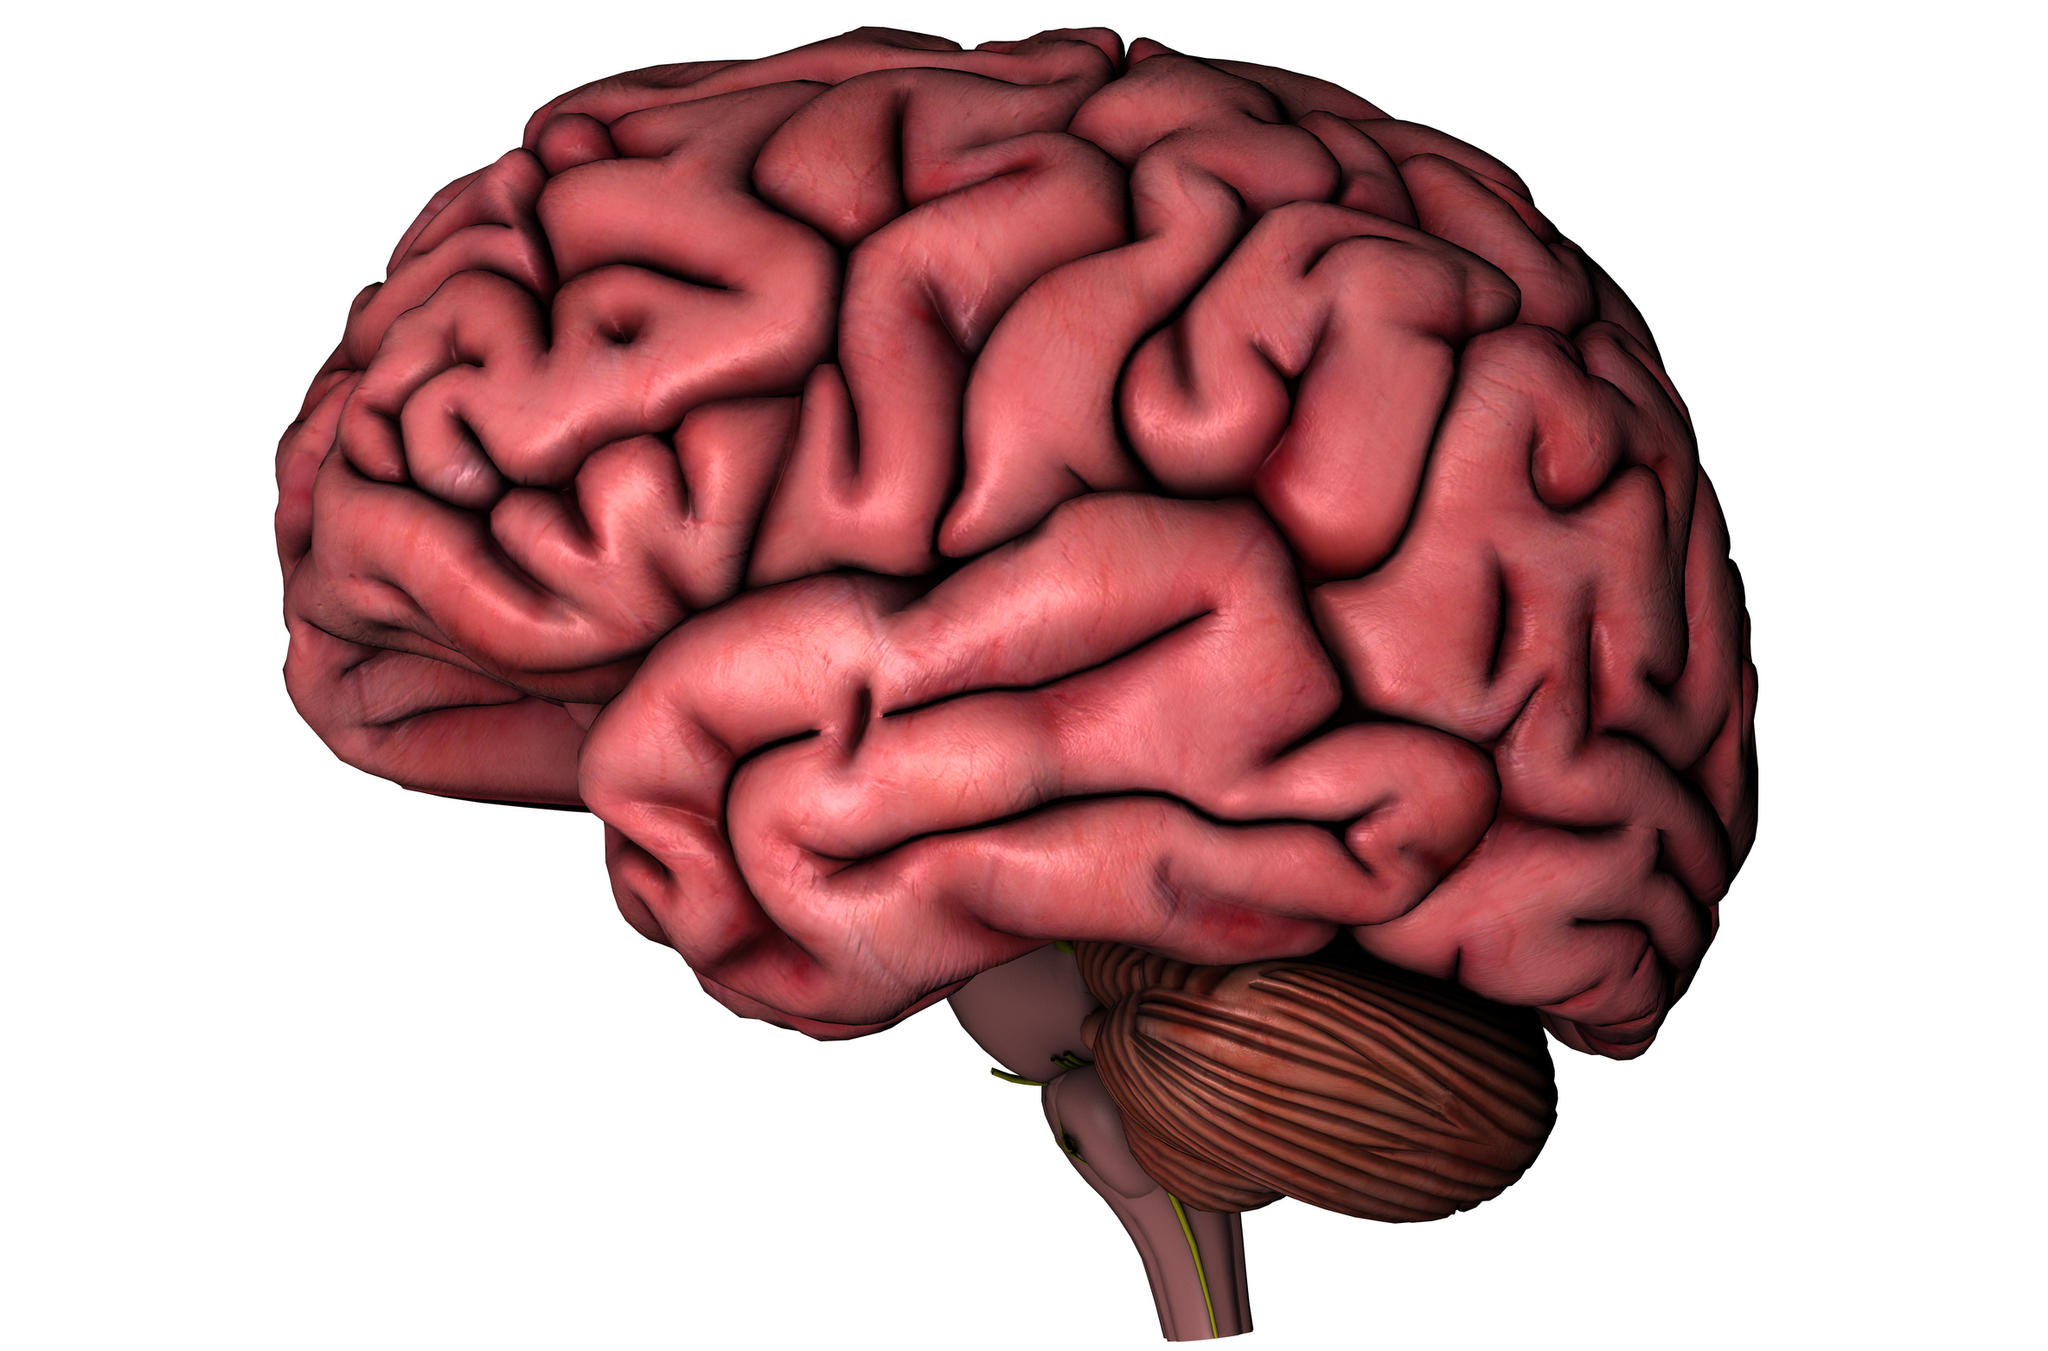 Human Brain On White Background   The Observation Deck